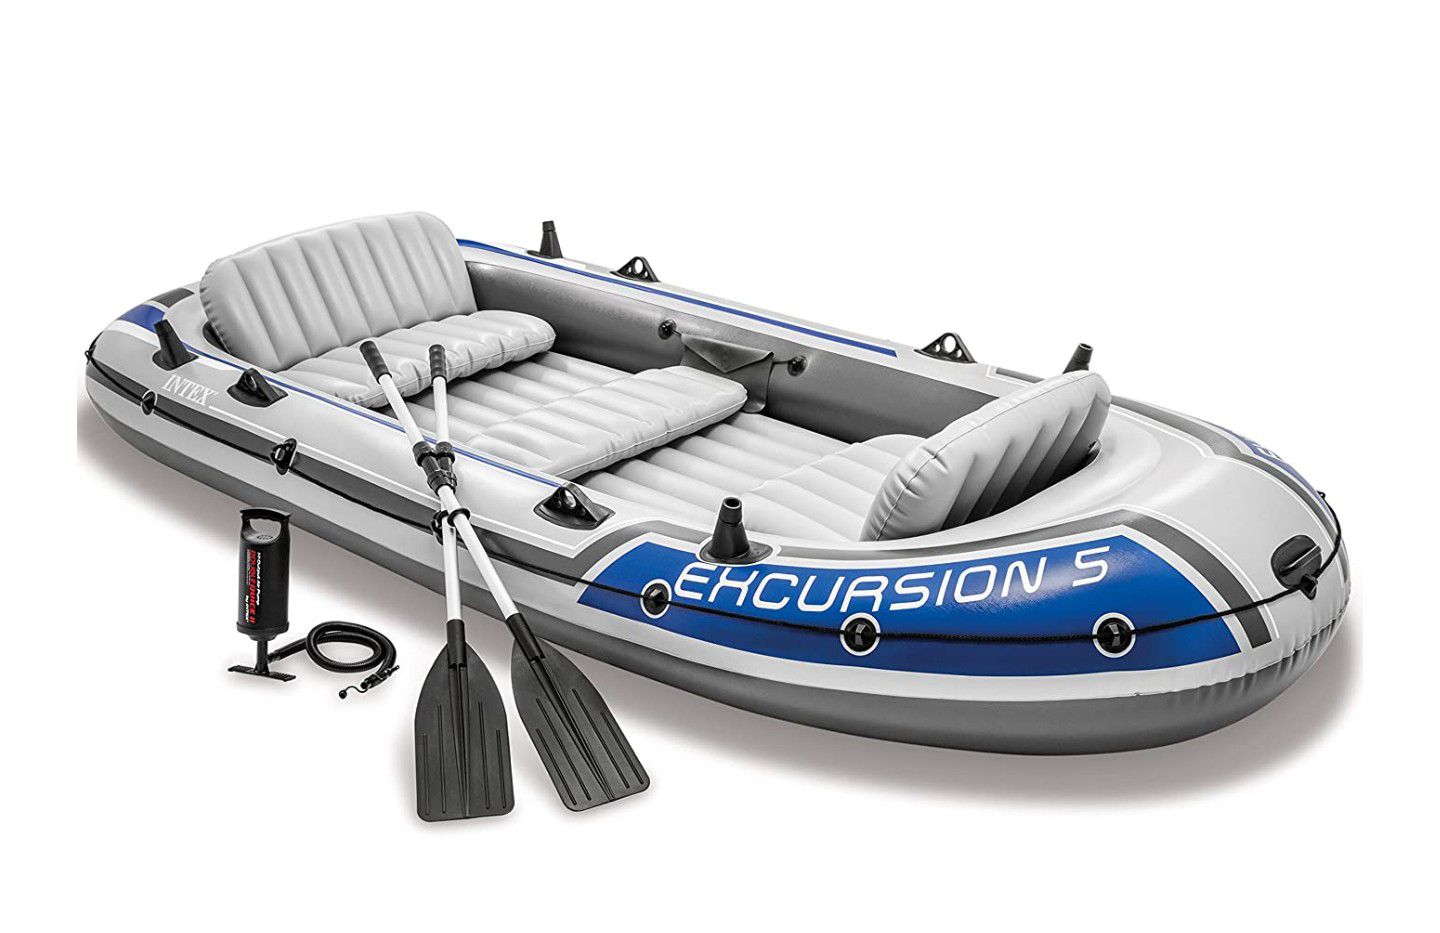 Excursion 5 inflatable boat (brand new)